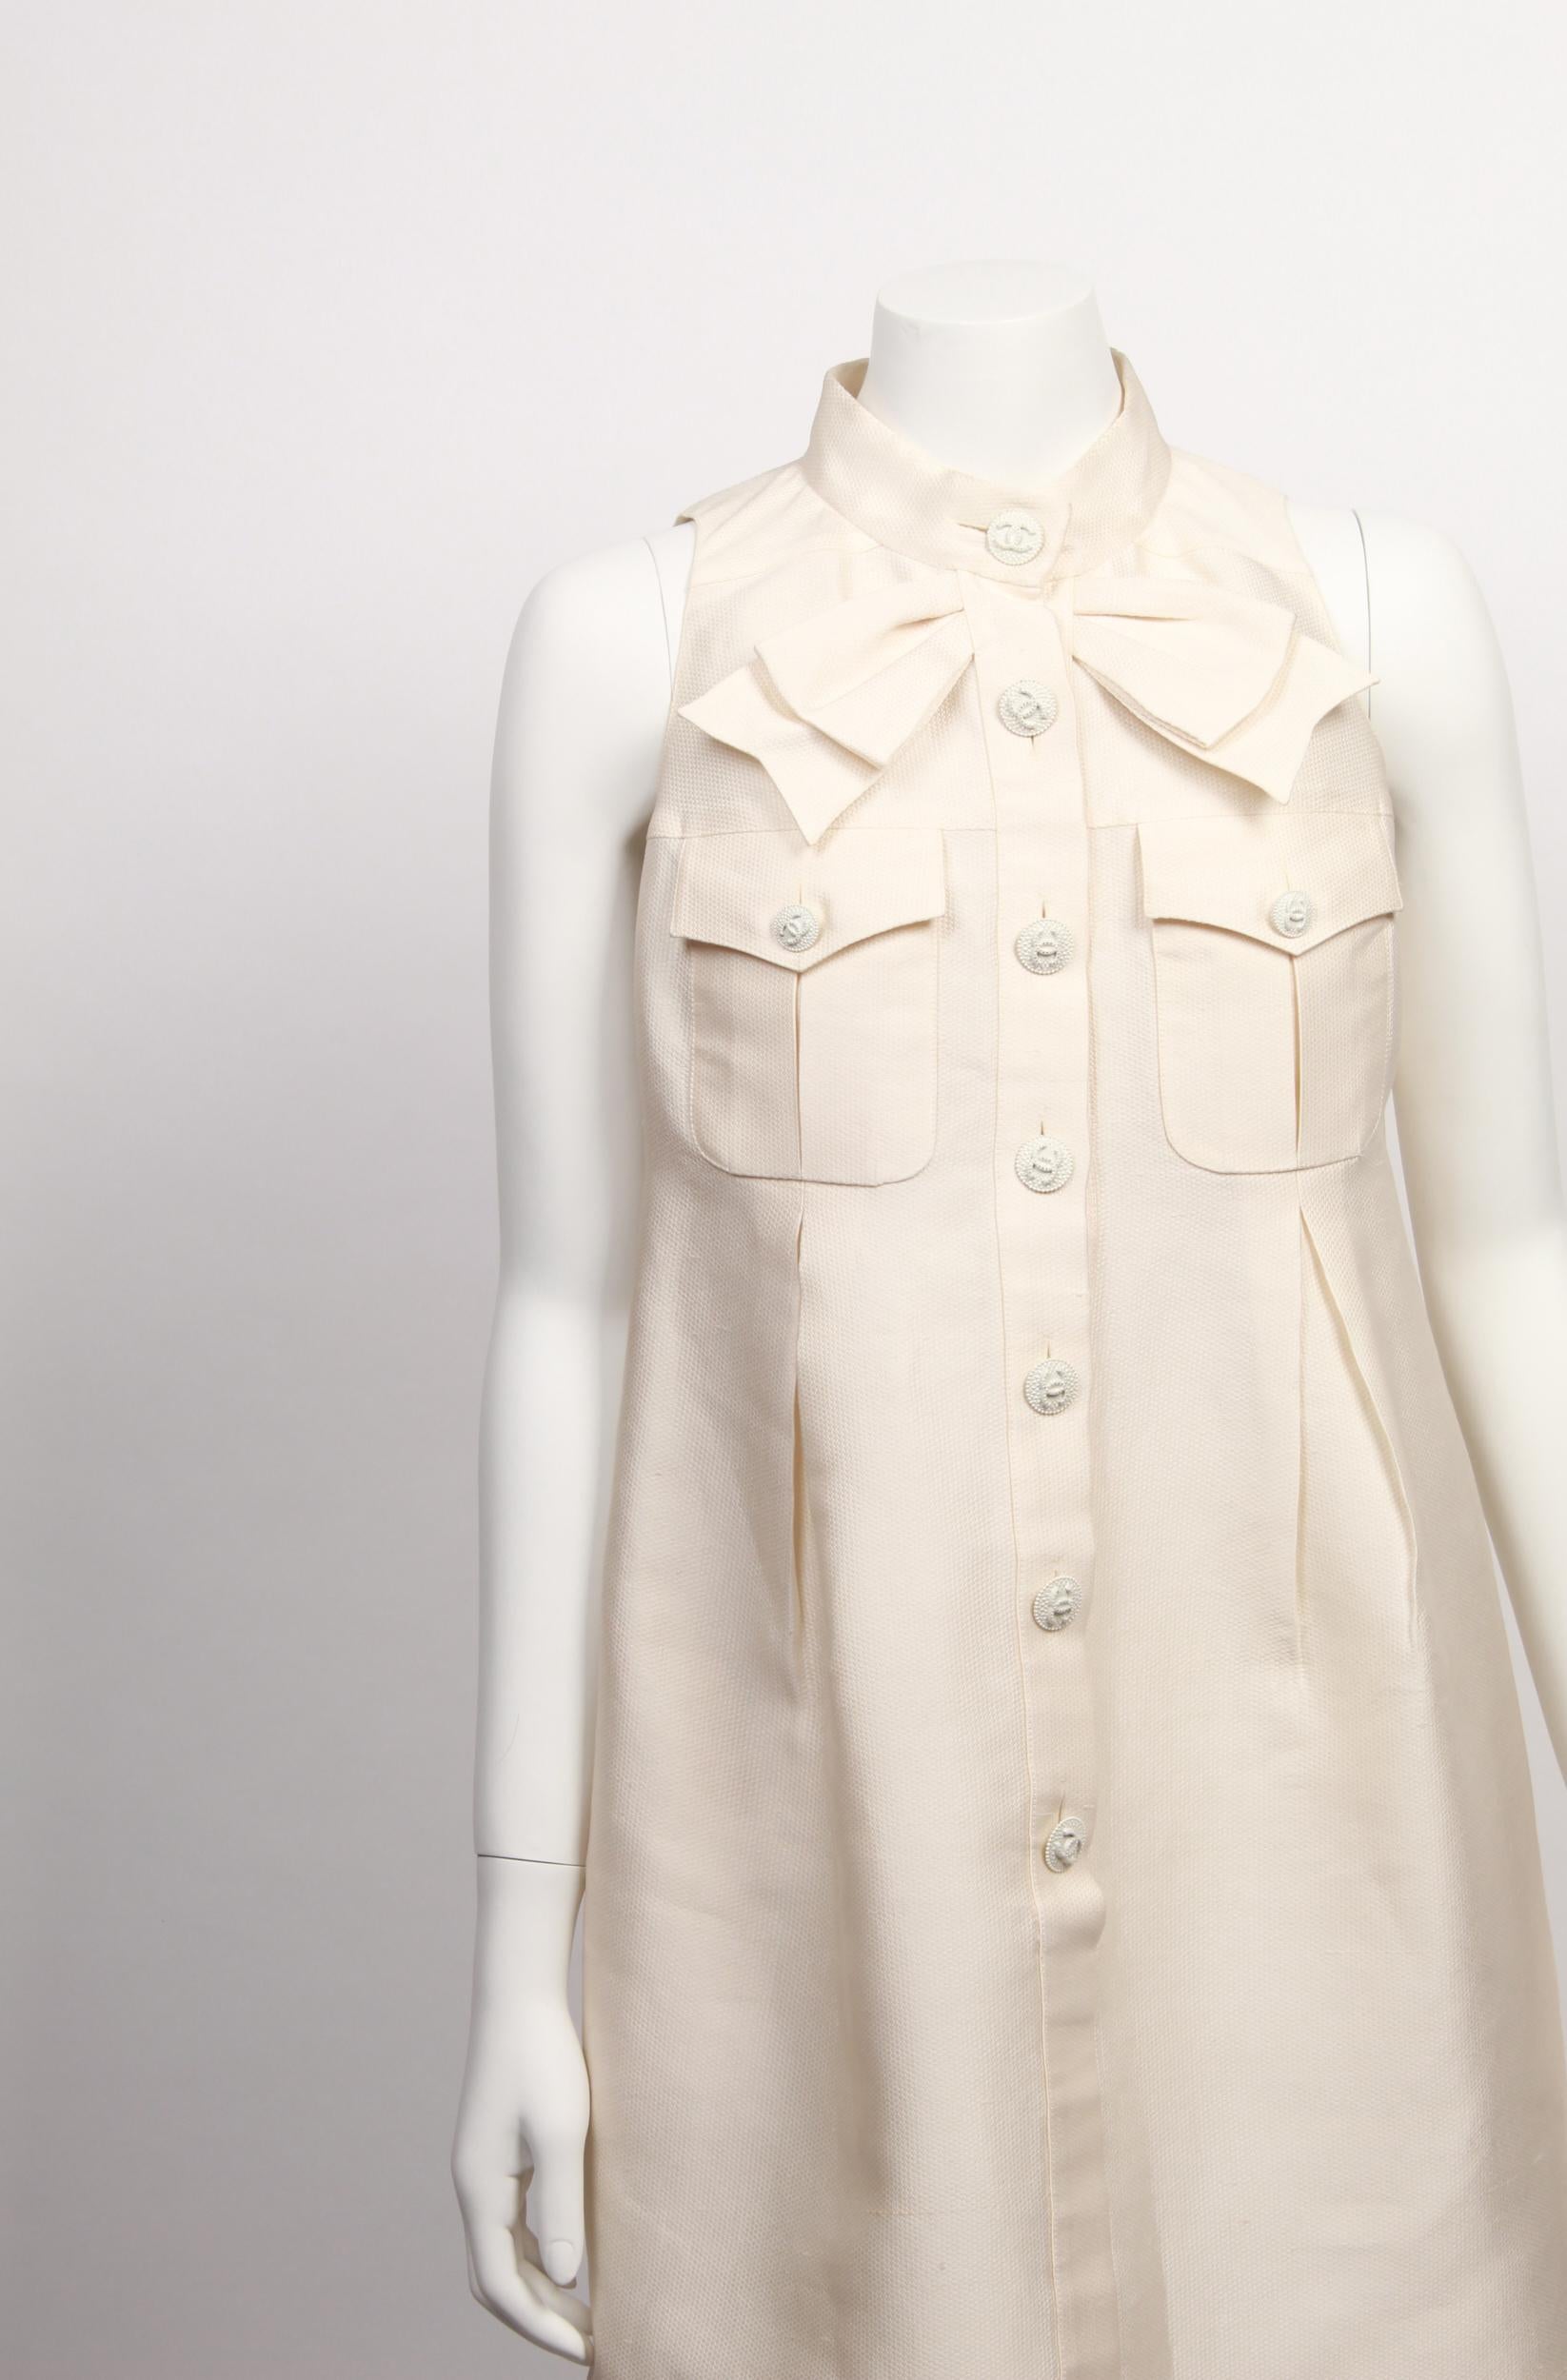 Chanel Dress With Bow From the 09 Spring Collection In Good Condition In Melbourne, Victoria